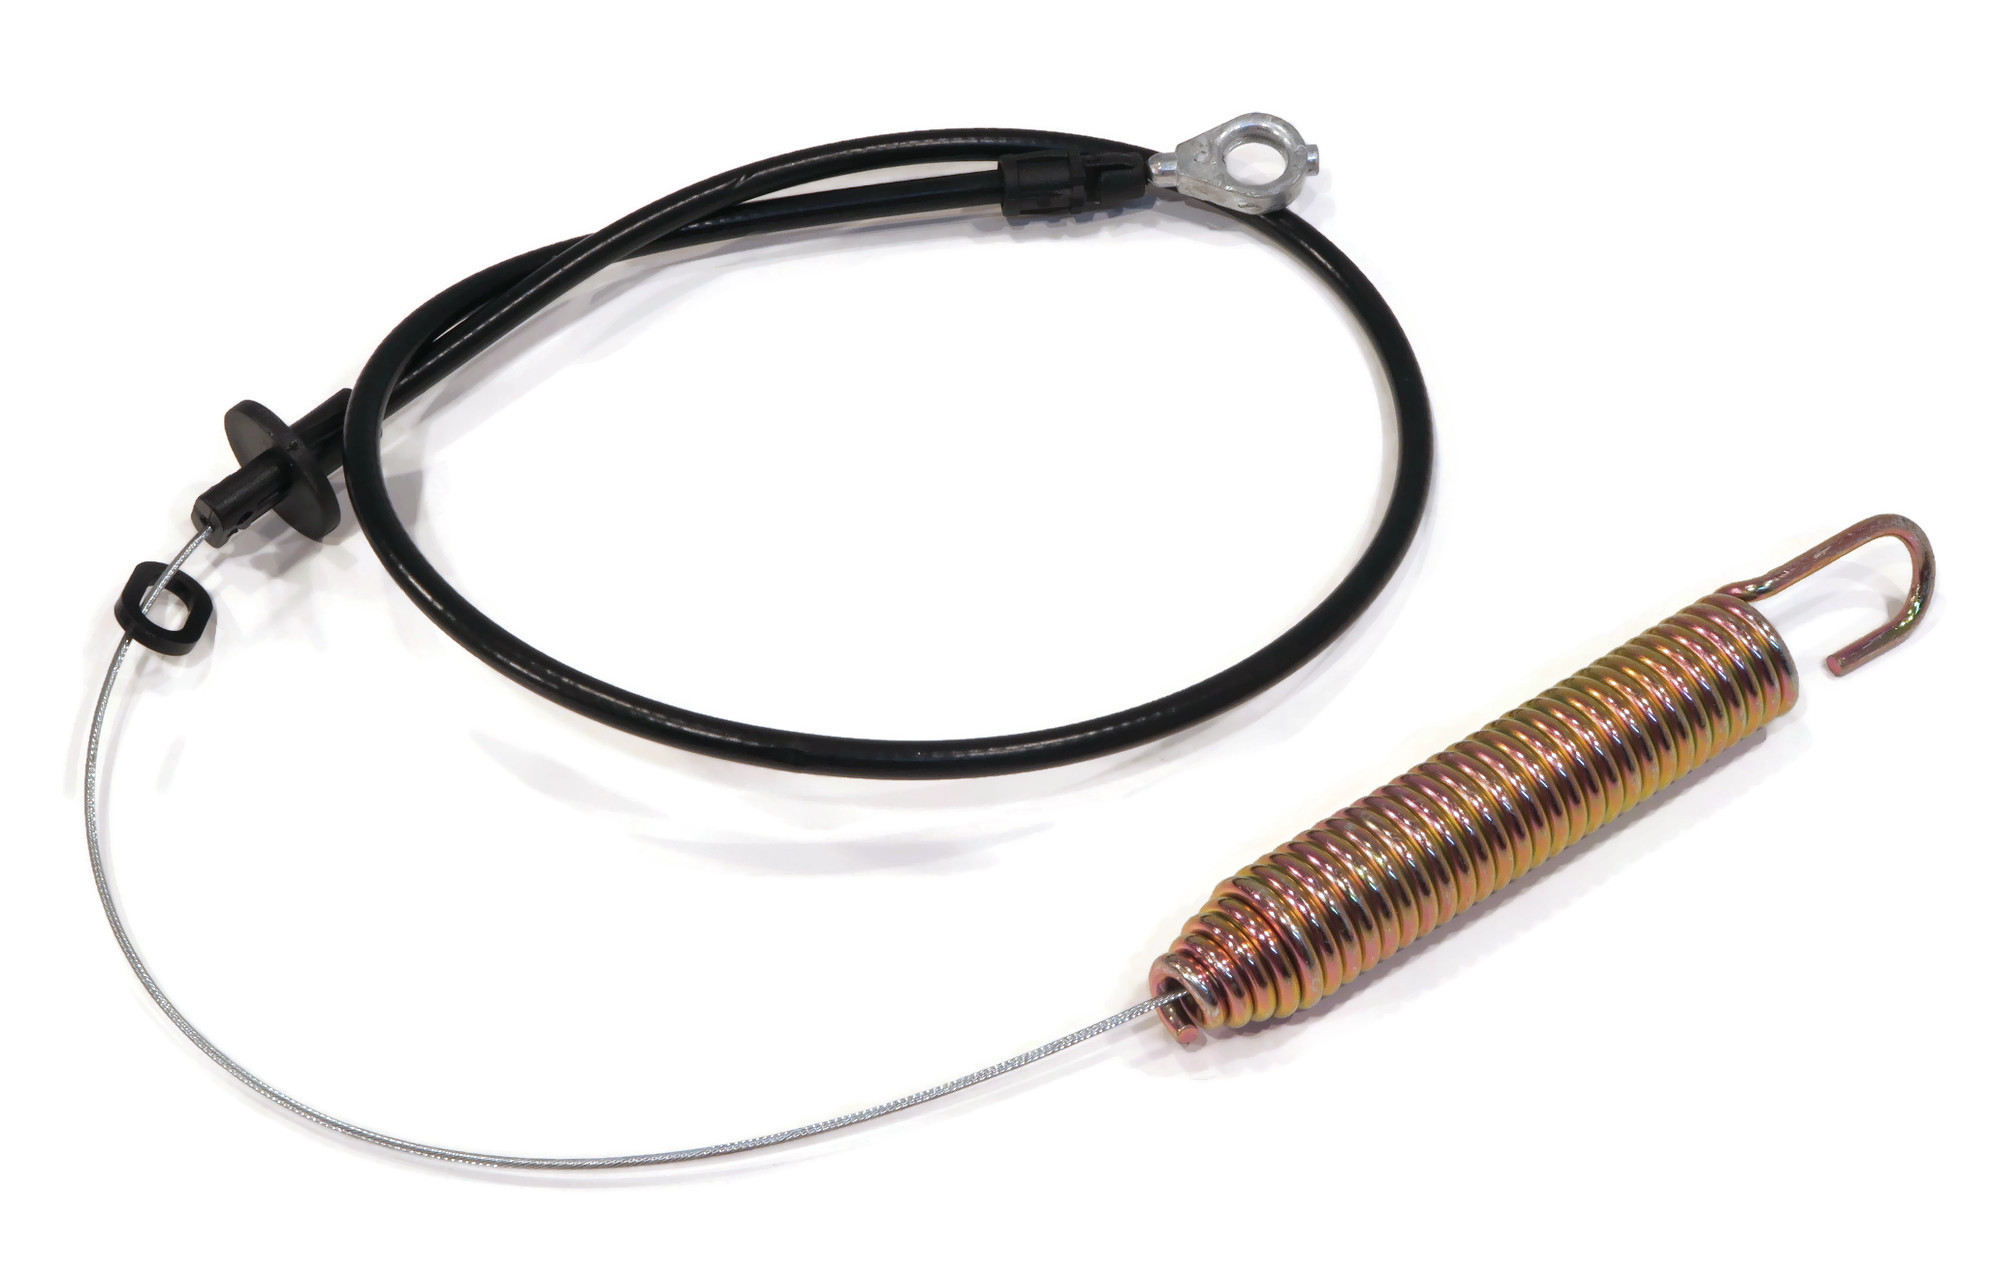 The ROP Shop | (2) Deck Engagement Clutch Cables for MTD LT942G LT942H 600 Series Lawn Tractors - image 2 of 9